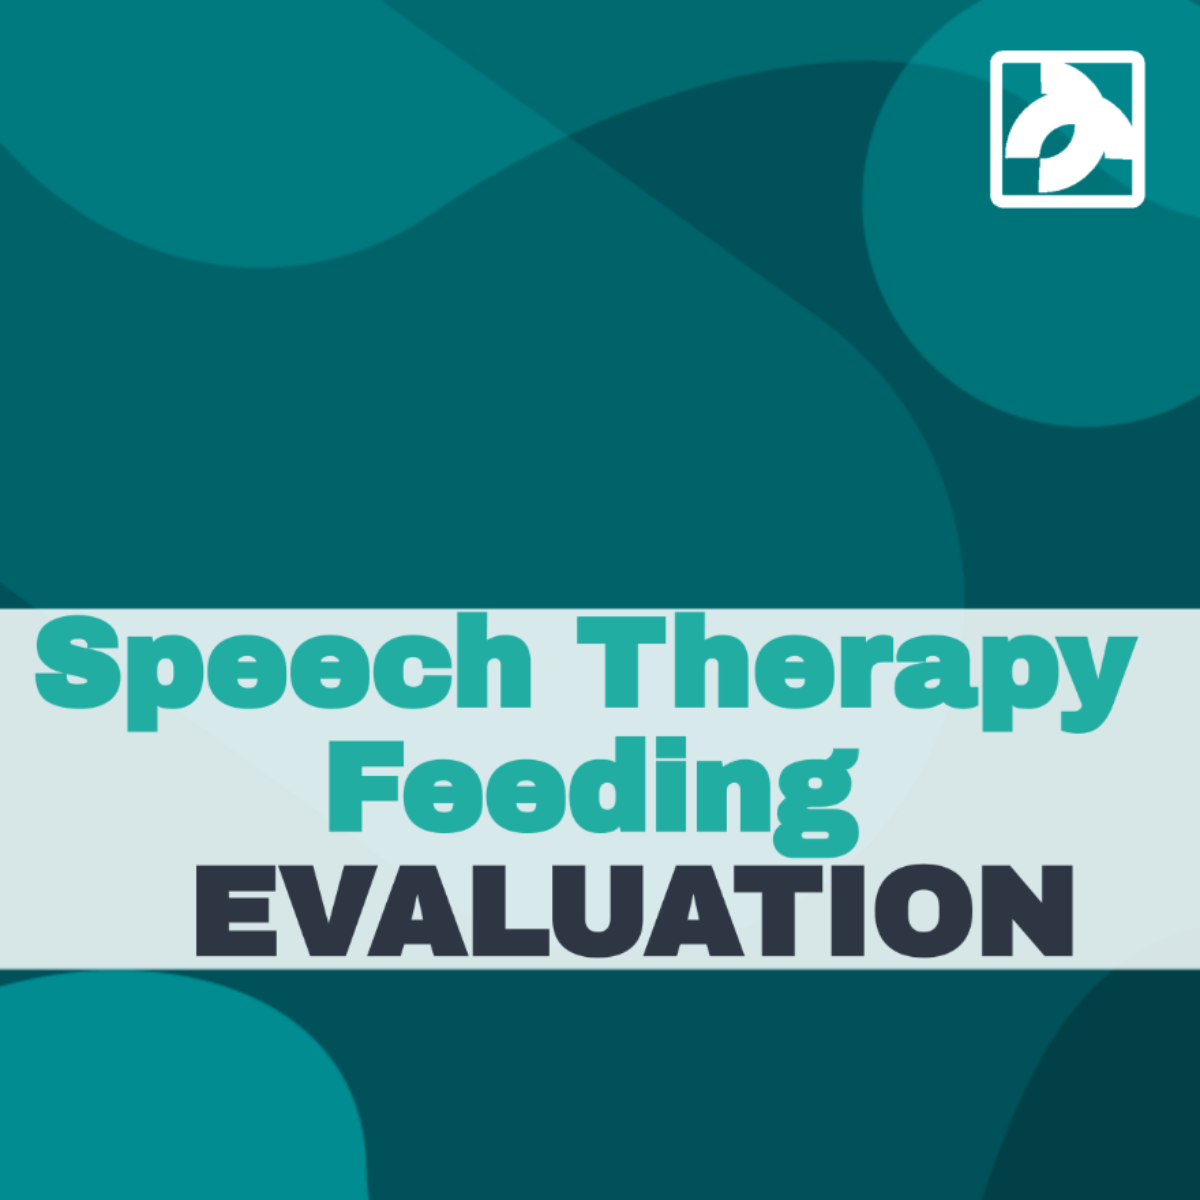 Speech Therapy Feeding Evaluation Template